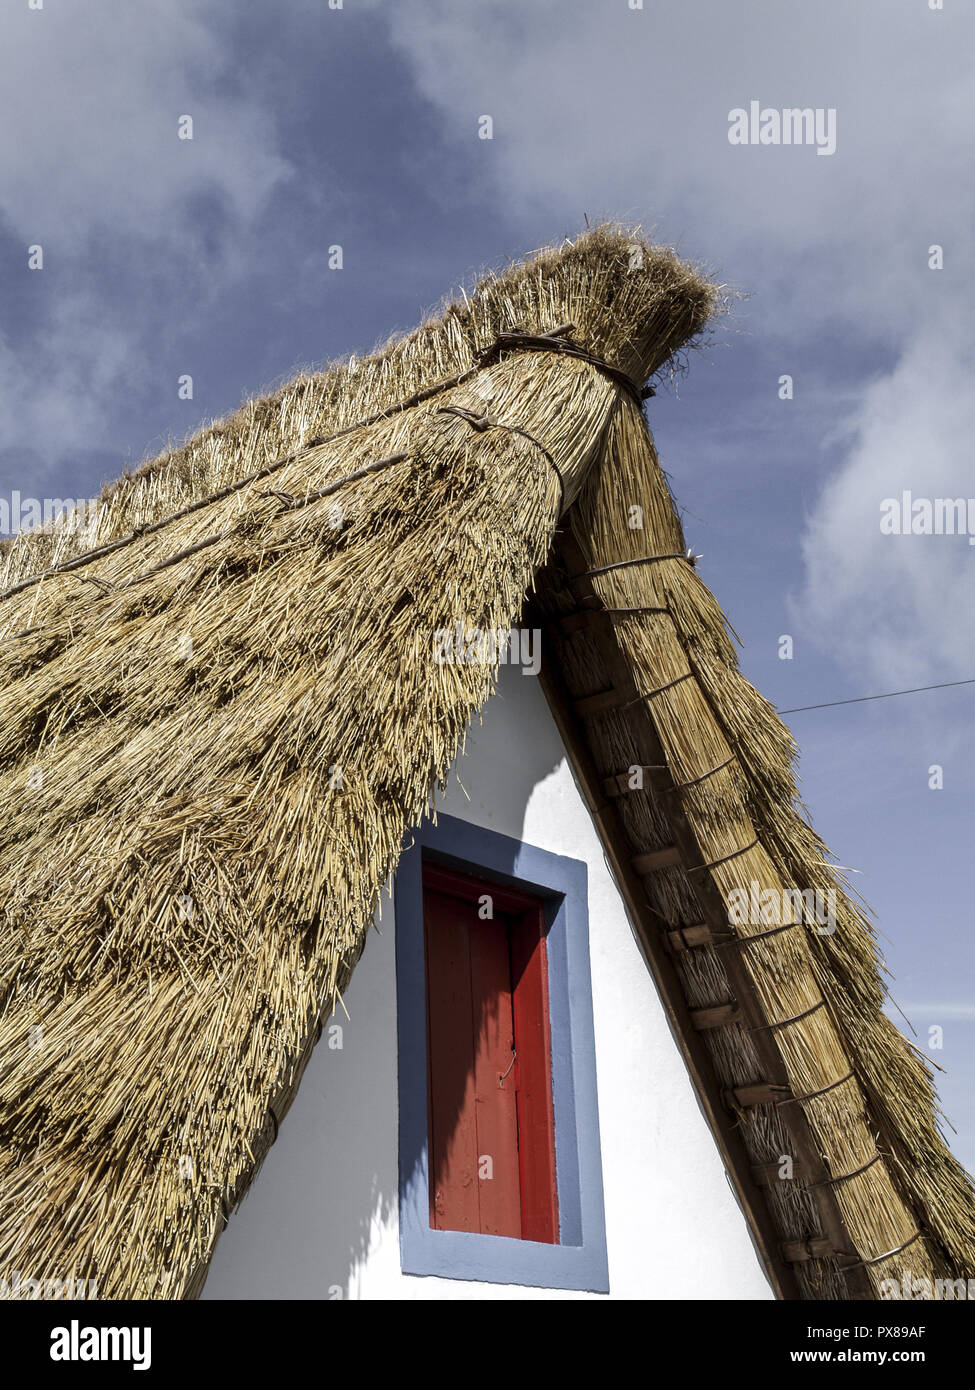 Casas de Colmo, traditional house with thatched roof, Madeira, Portugal, Santana Stock Photo